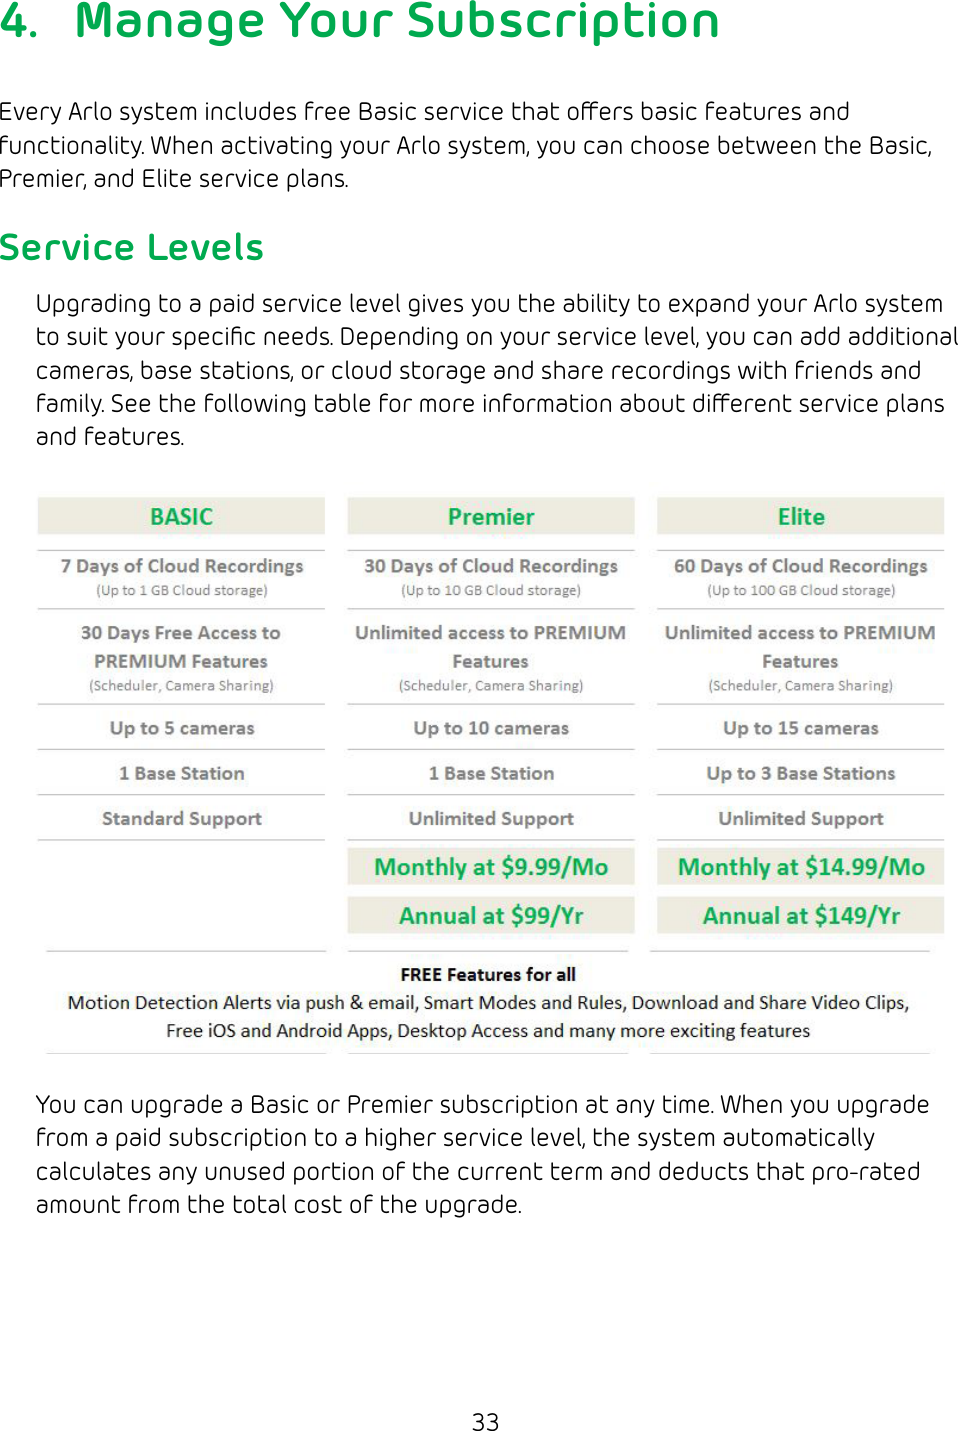 334.  Manage Your SubscriptionEvery Arlo system includes free Basic service that oers basic features and functionality. When activating your Arlo system, you can choose between the Basic, Premier, and Elite service plans.Service LevelsUpgrading to a paid service level gives you the ability to expand your Arlo system to suit your speciﬁc needs. Depending on your service level, you can add additional cameras, base stations, or cloud storage and share recordings with friends and family. See the following table for more information about dierent service plans and features. You can upgrade a Basic or Premier subscription at any time. When you upgrade from a paid subscription to a higher service level, the system automatically calculates any unused portion of the current term and deducts that pro‑rated amount from the total cost of the upgrade.